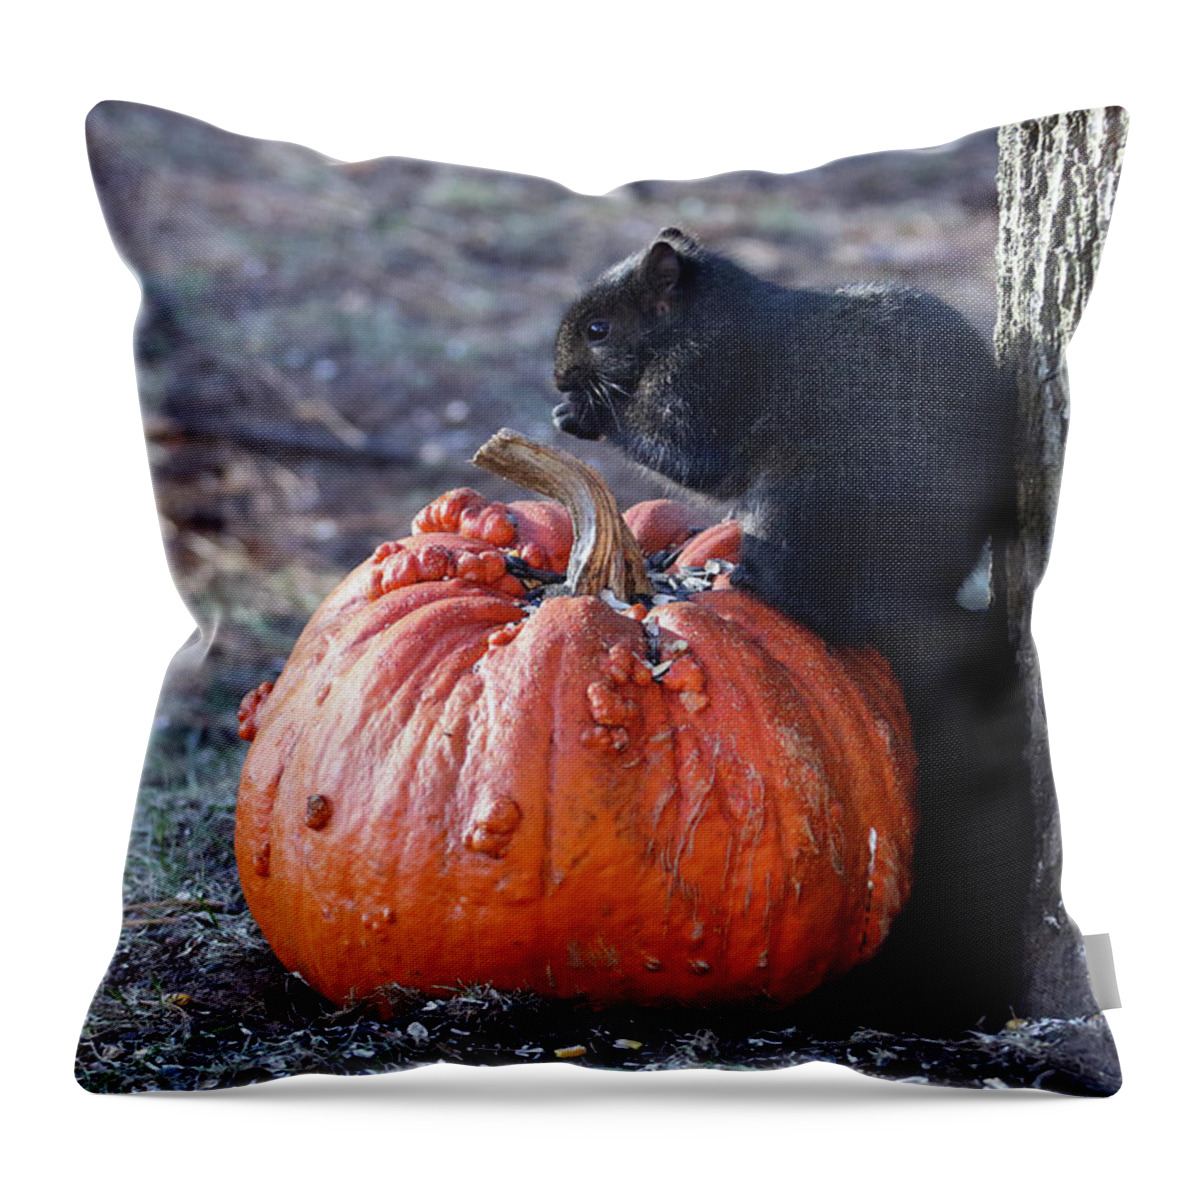 Squirrel Throw Pillow featuring the photograph Black Squirrel on Pumpkin by Brook Burling